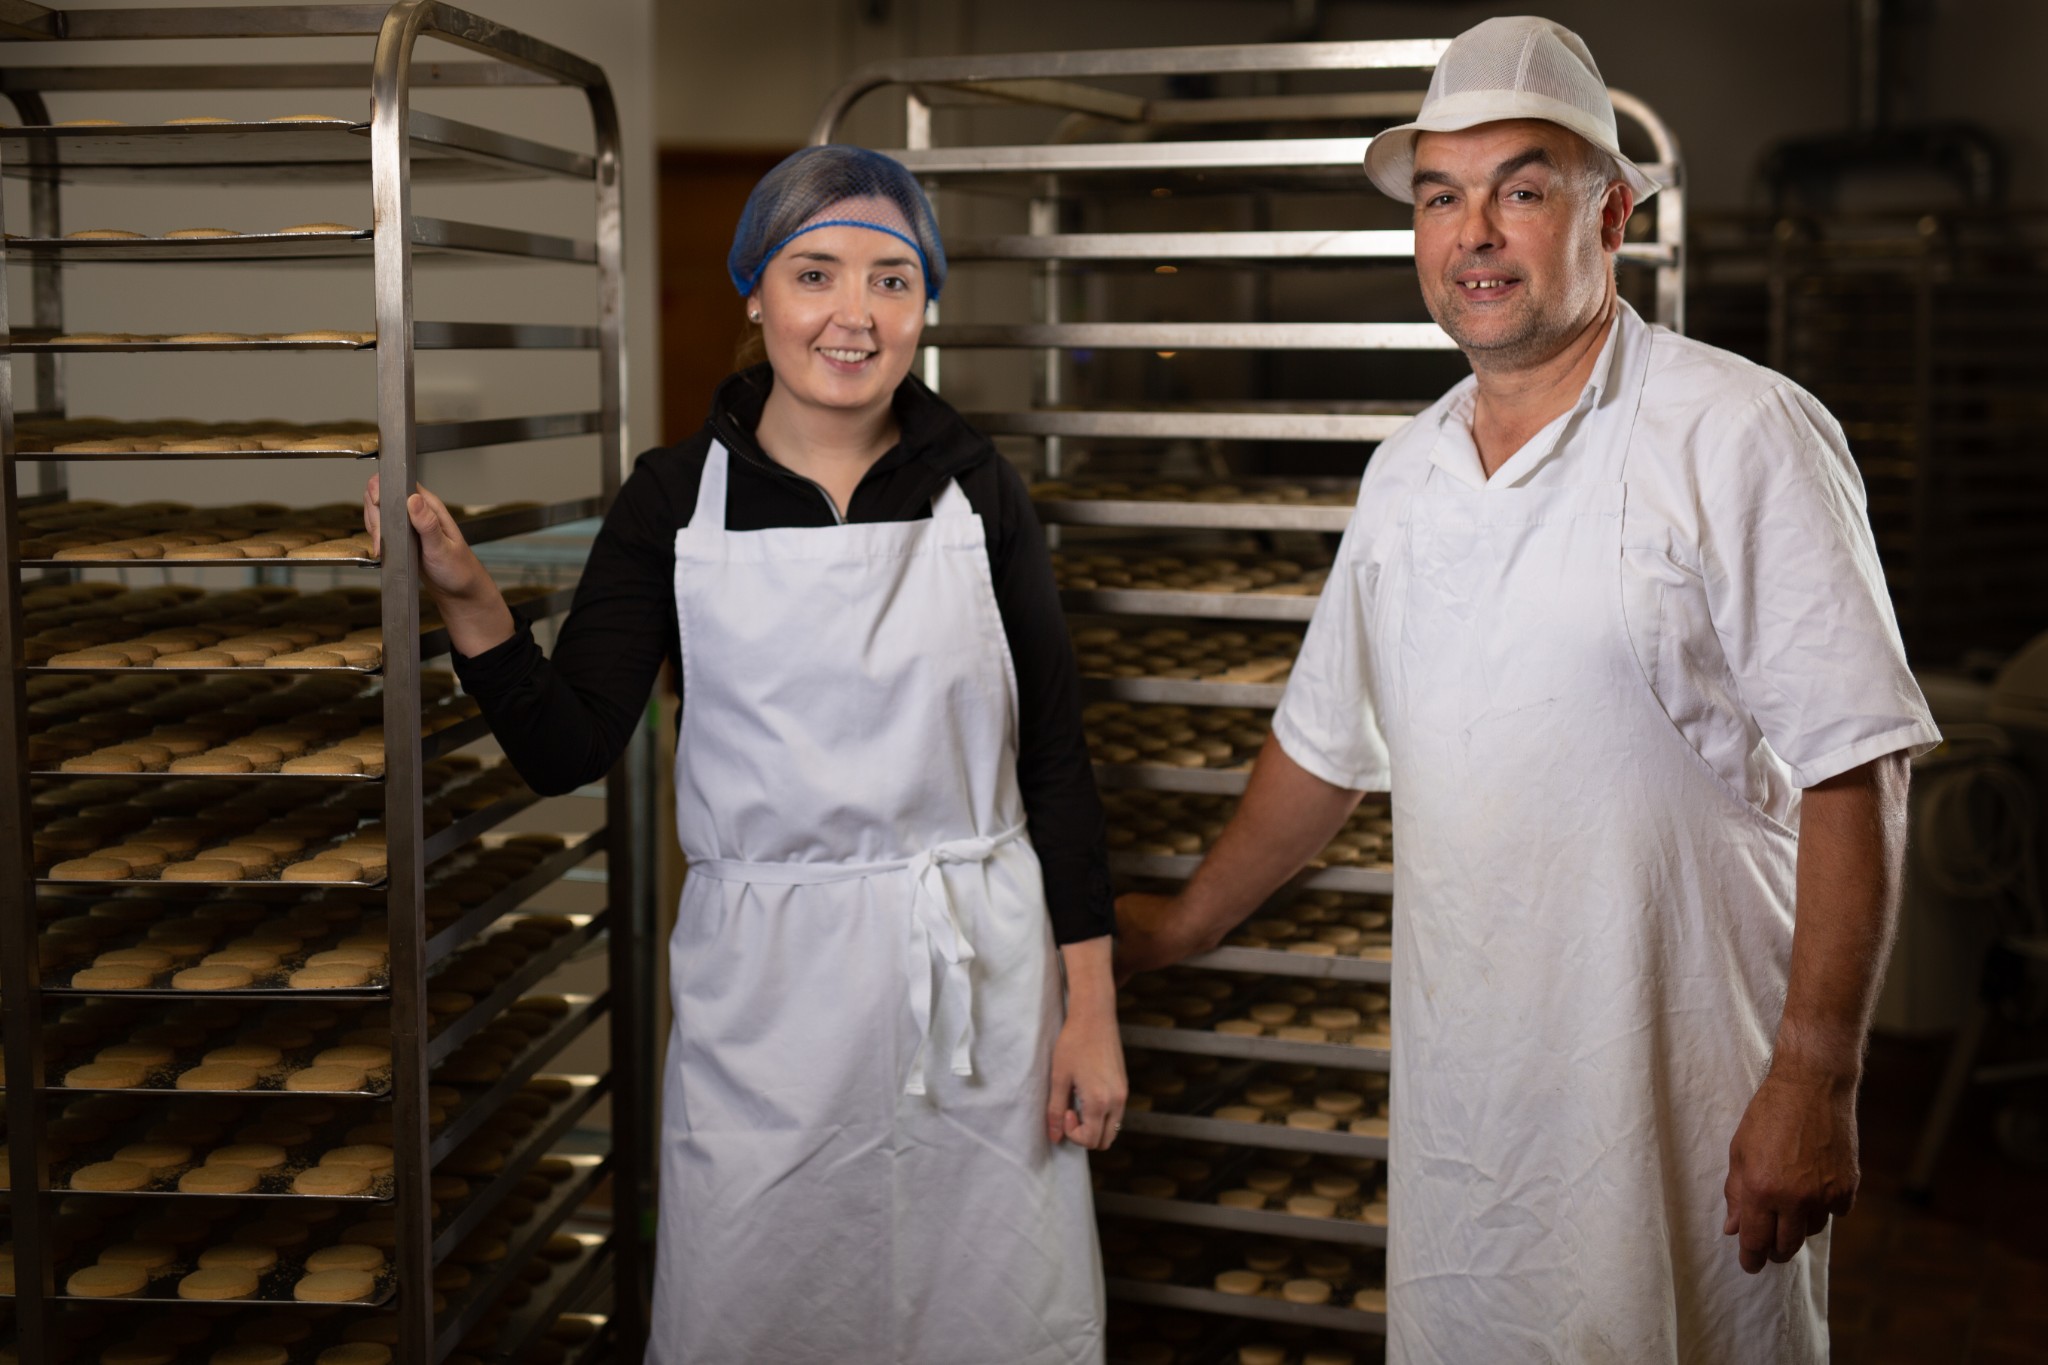 Katie Brass and her dad, George Rendall, from Rendall's Bakery